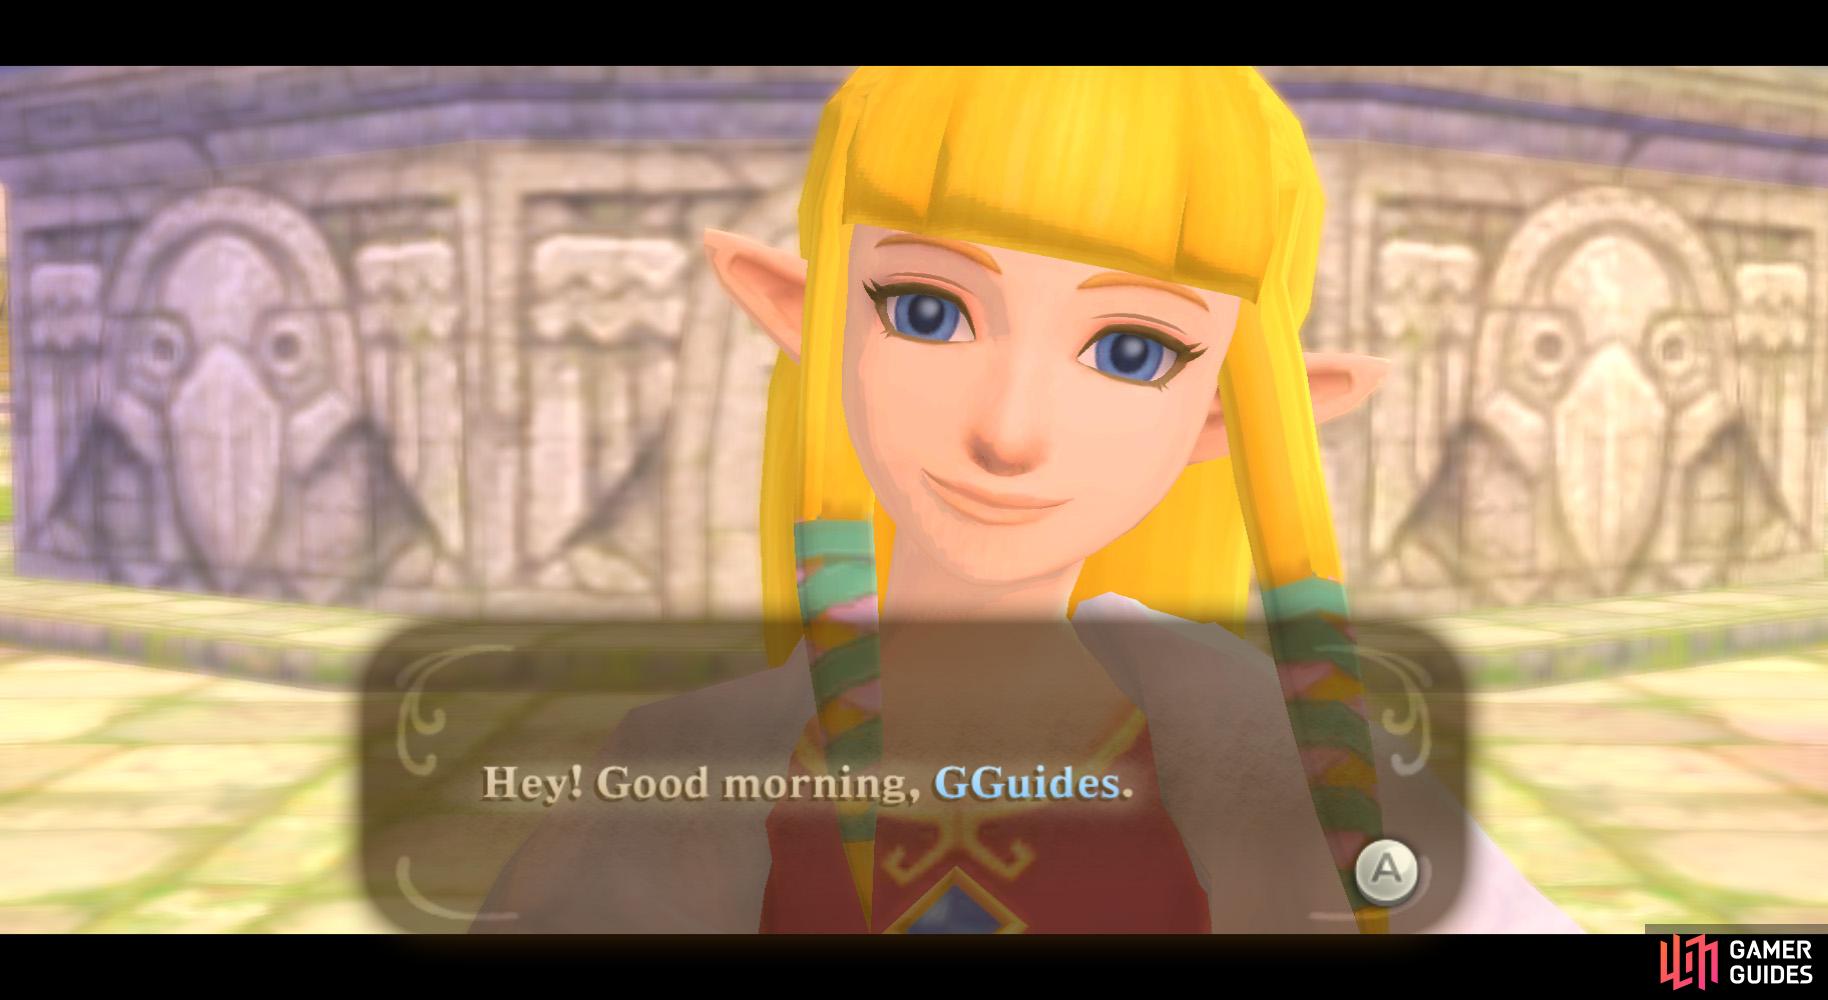 This is Zelda, the game's namesake.